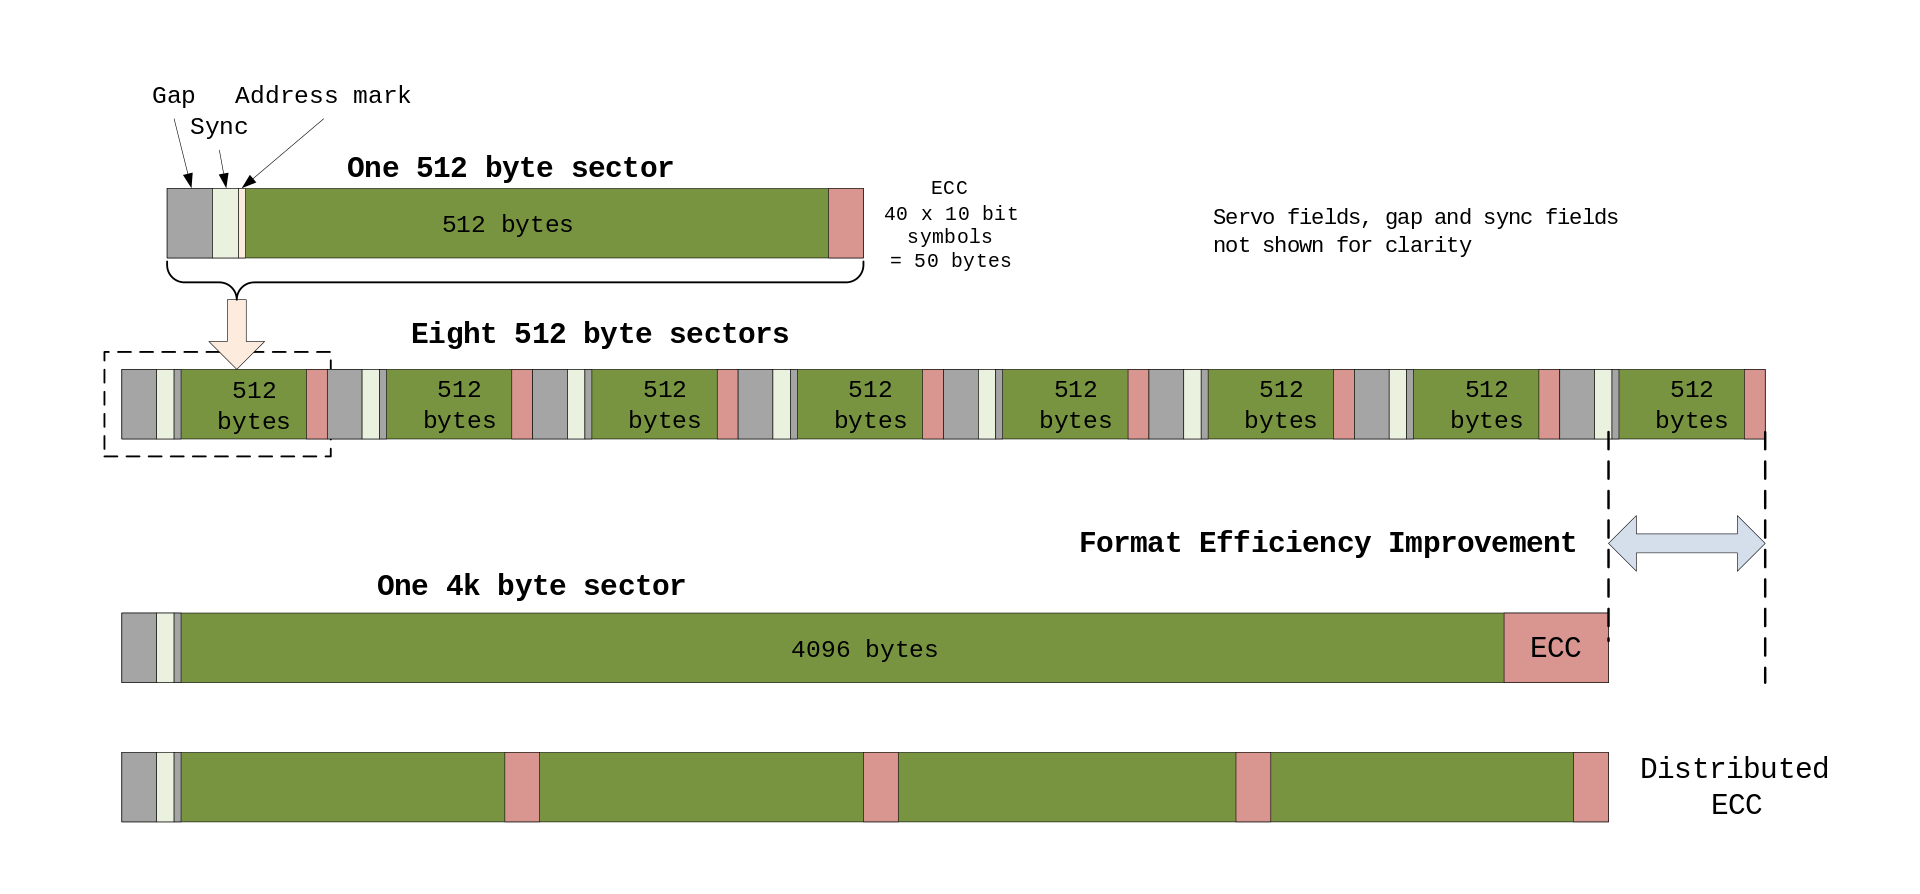 format efficiency of 512-byter sector and 4k sector